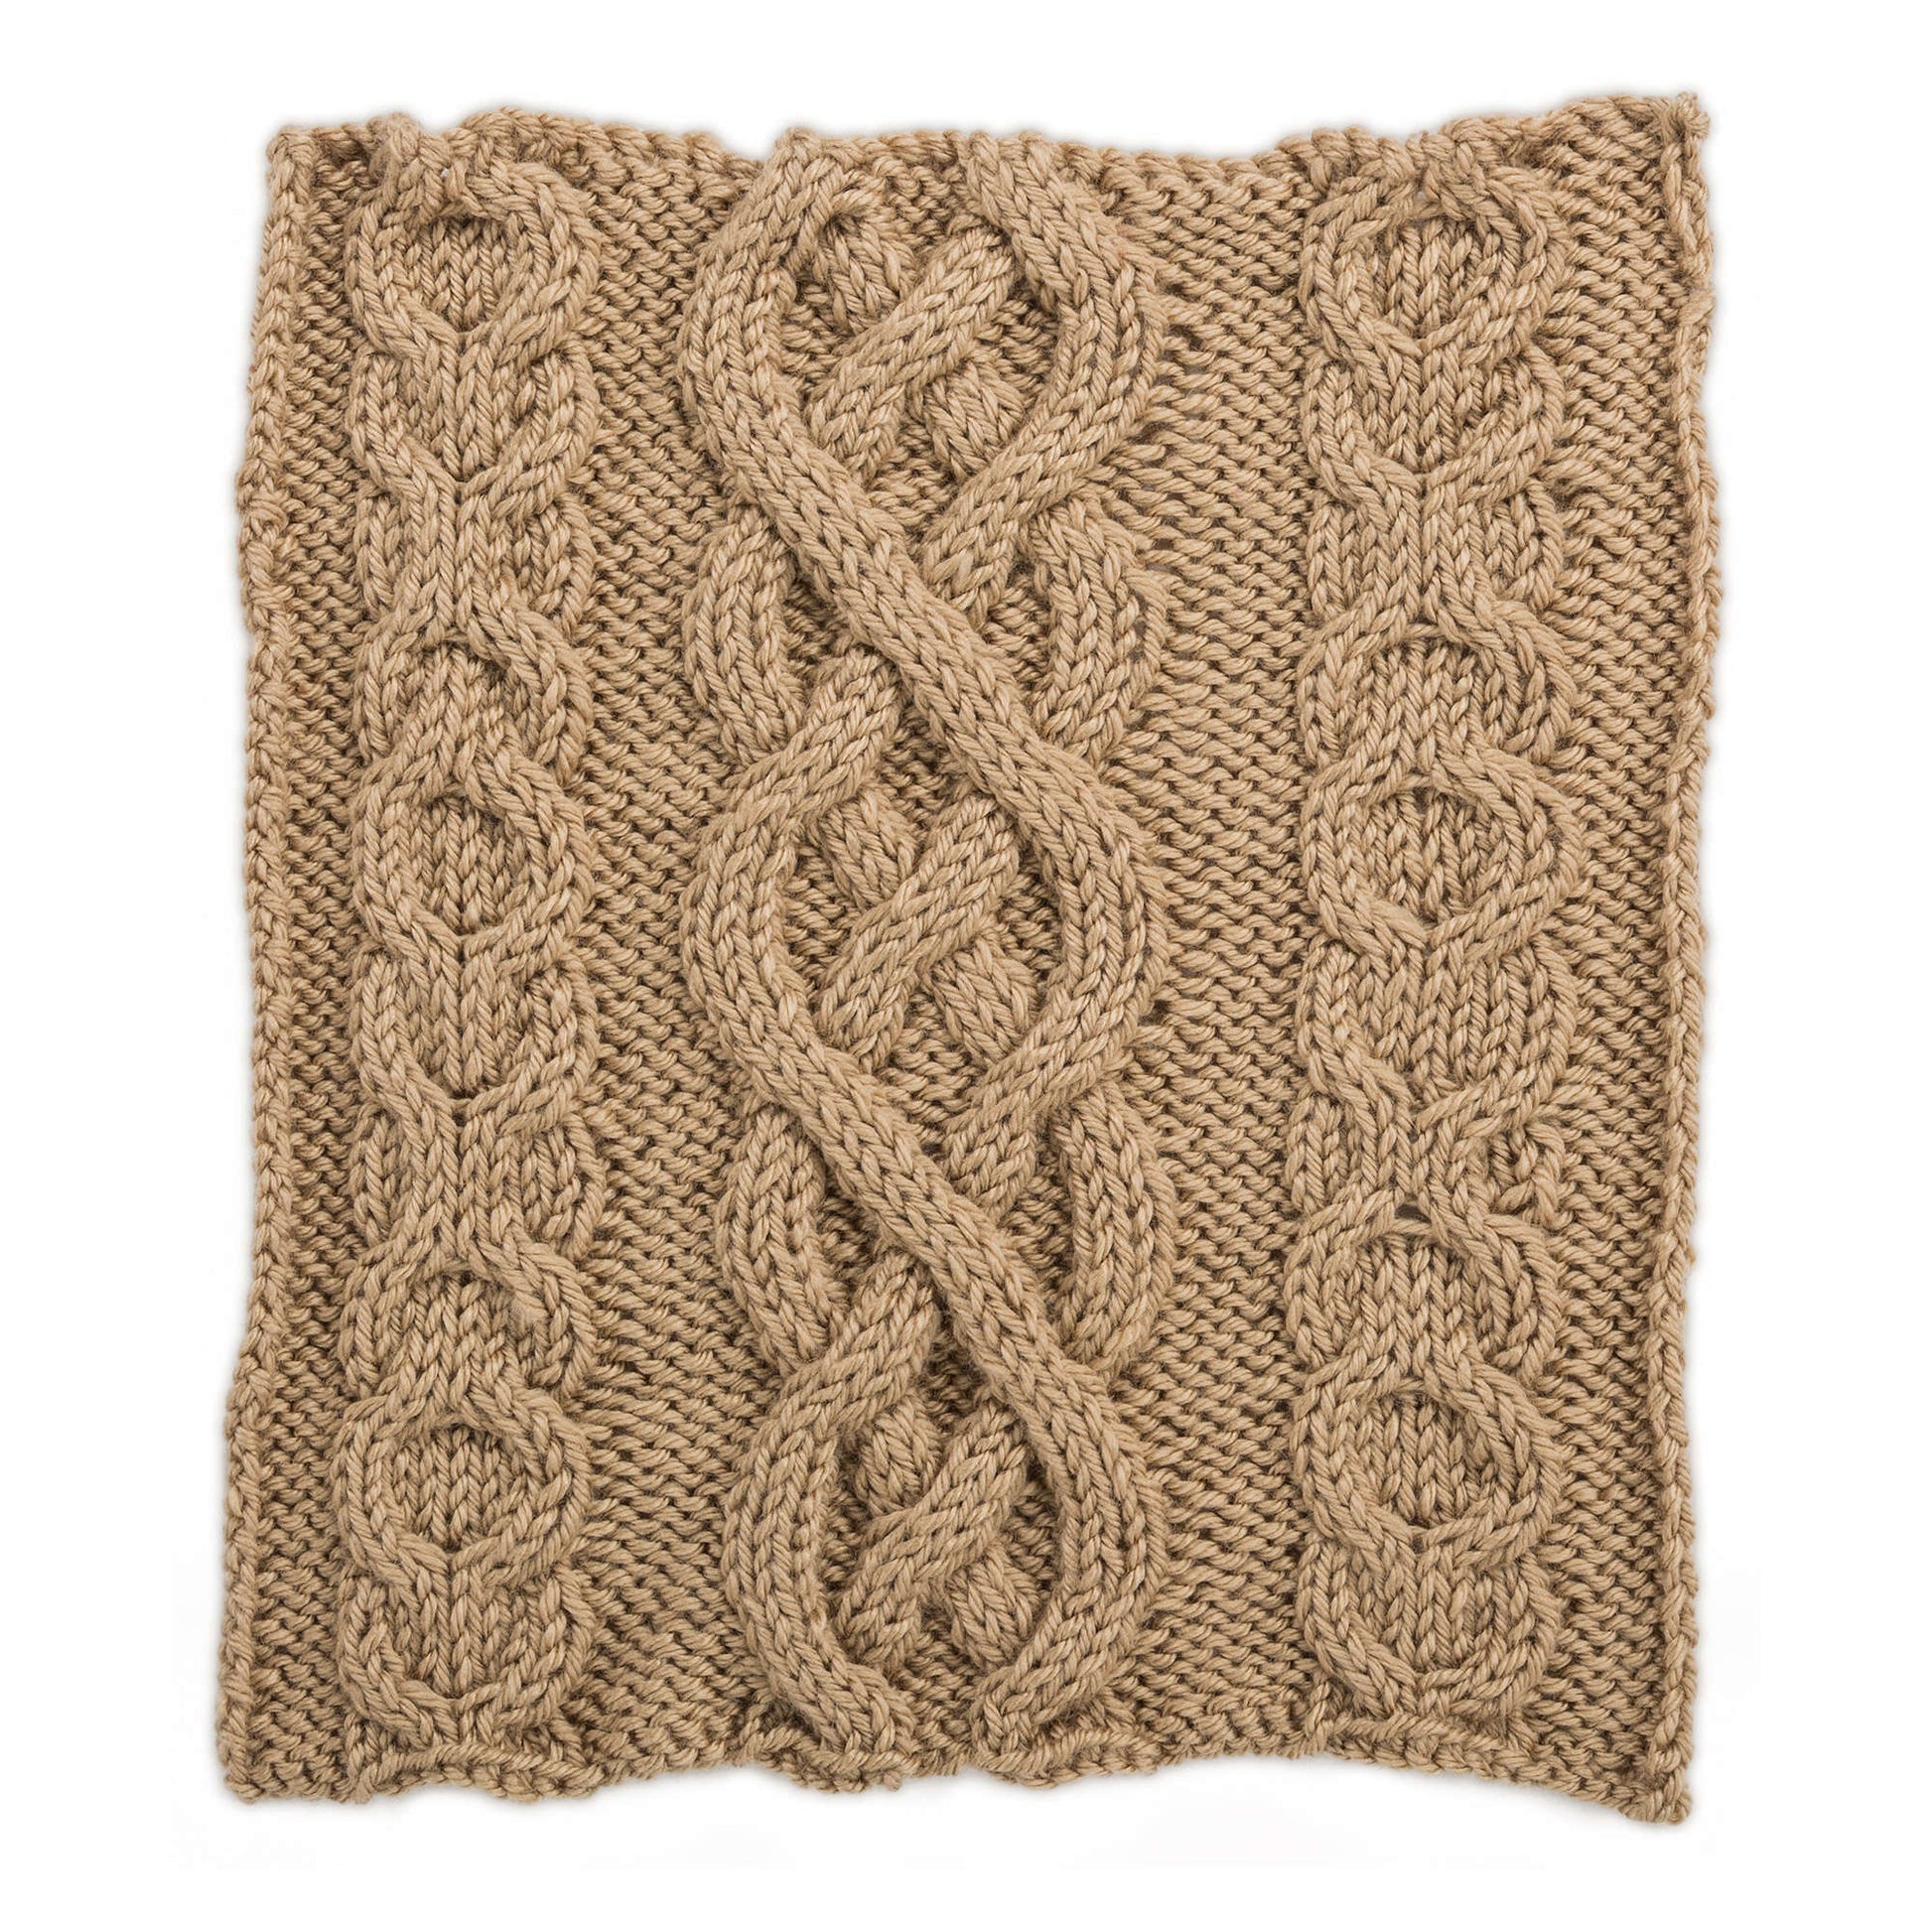 Free Red Heart XO Panels and Ensign's Braid Square for Knit Your Cables Afghan Pattern